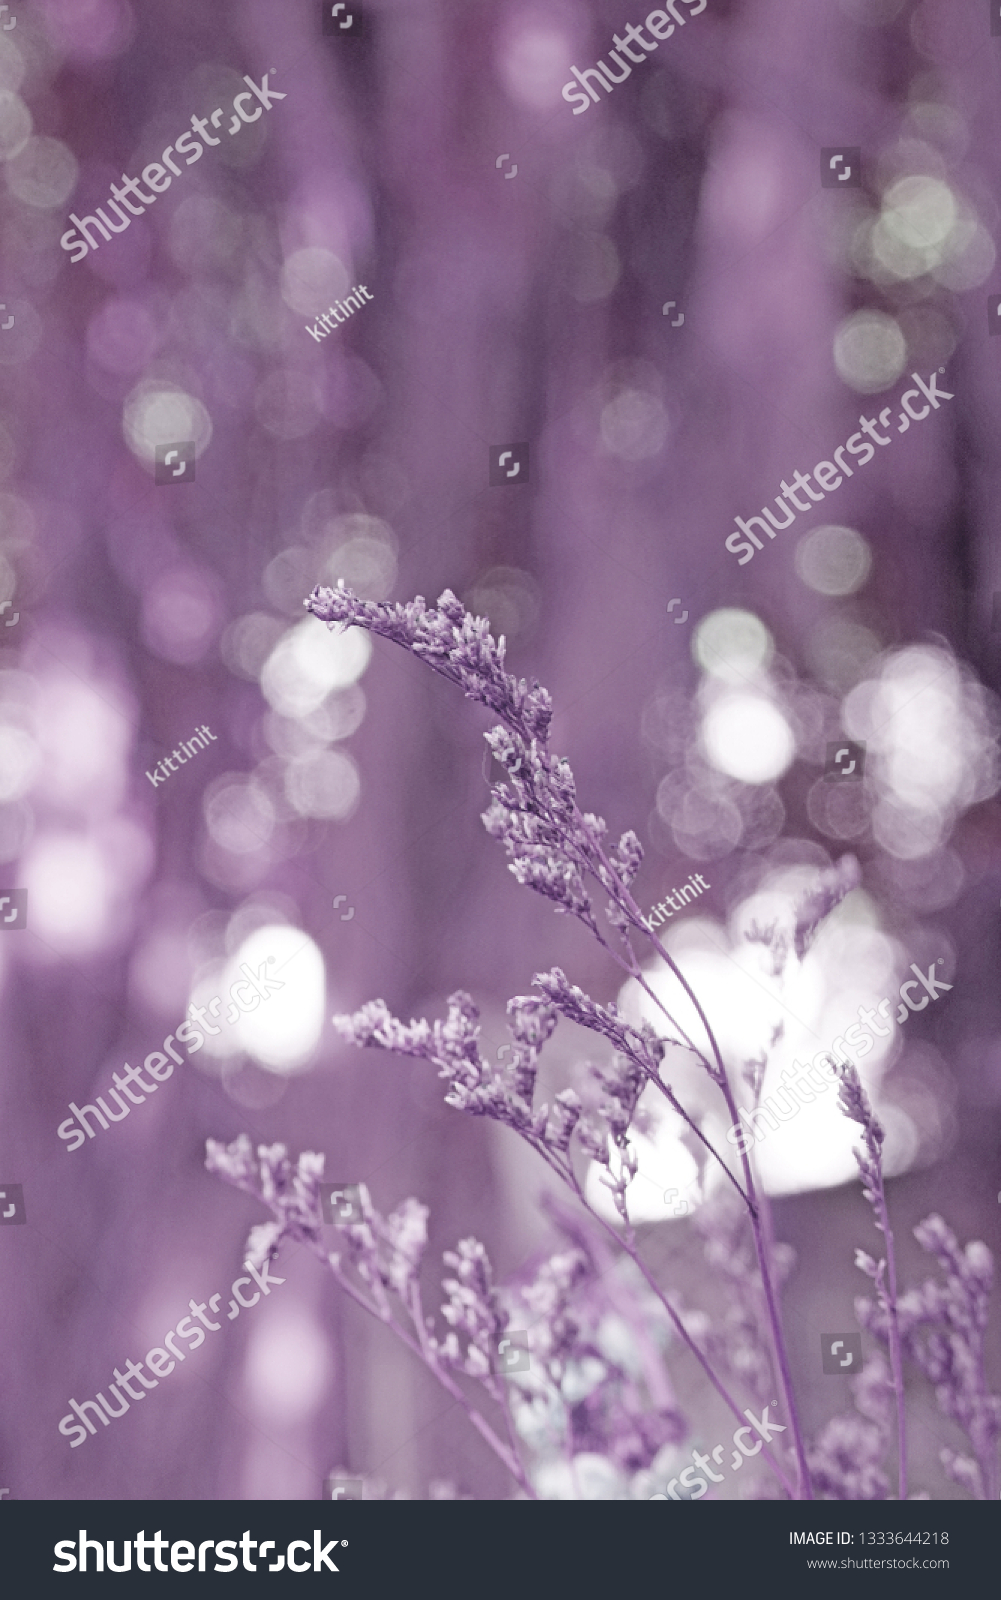 Blurred Grass Flowers with Bokeh background - Violet pastel Color Patterns  #1333644218